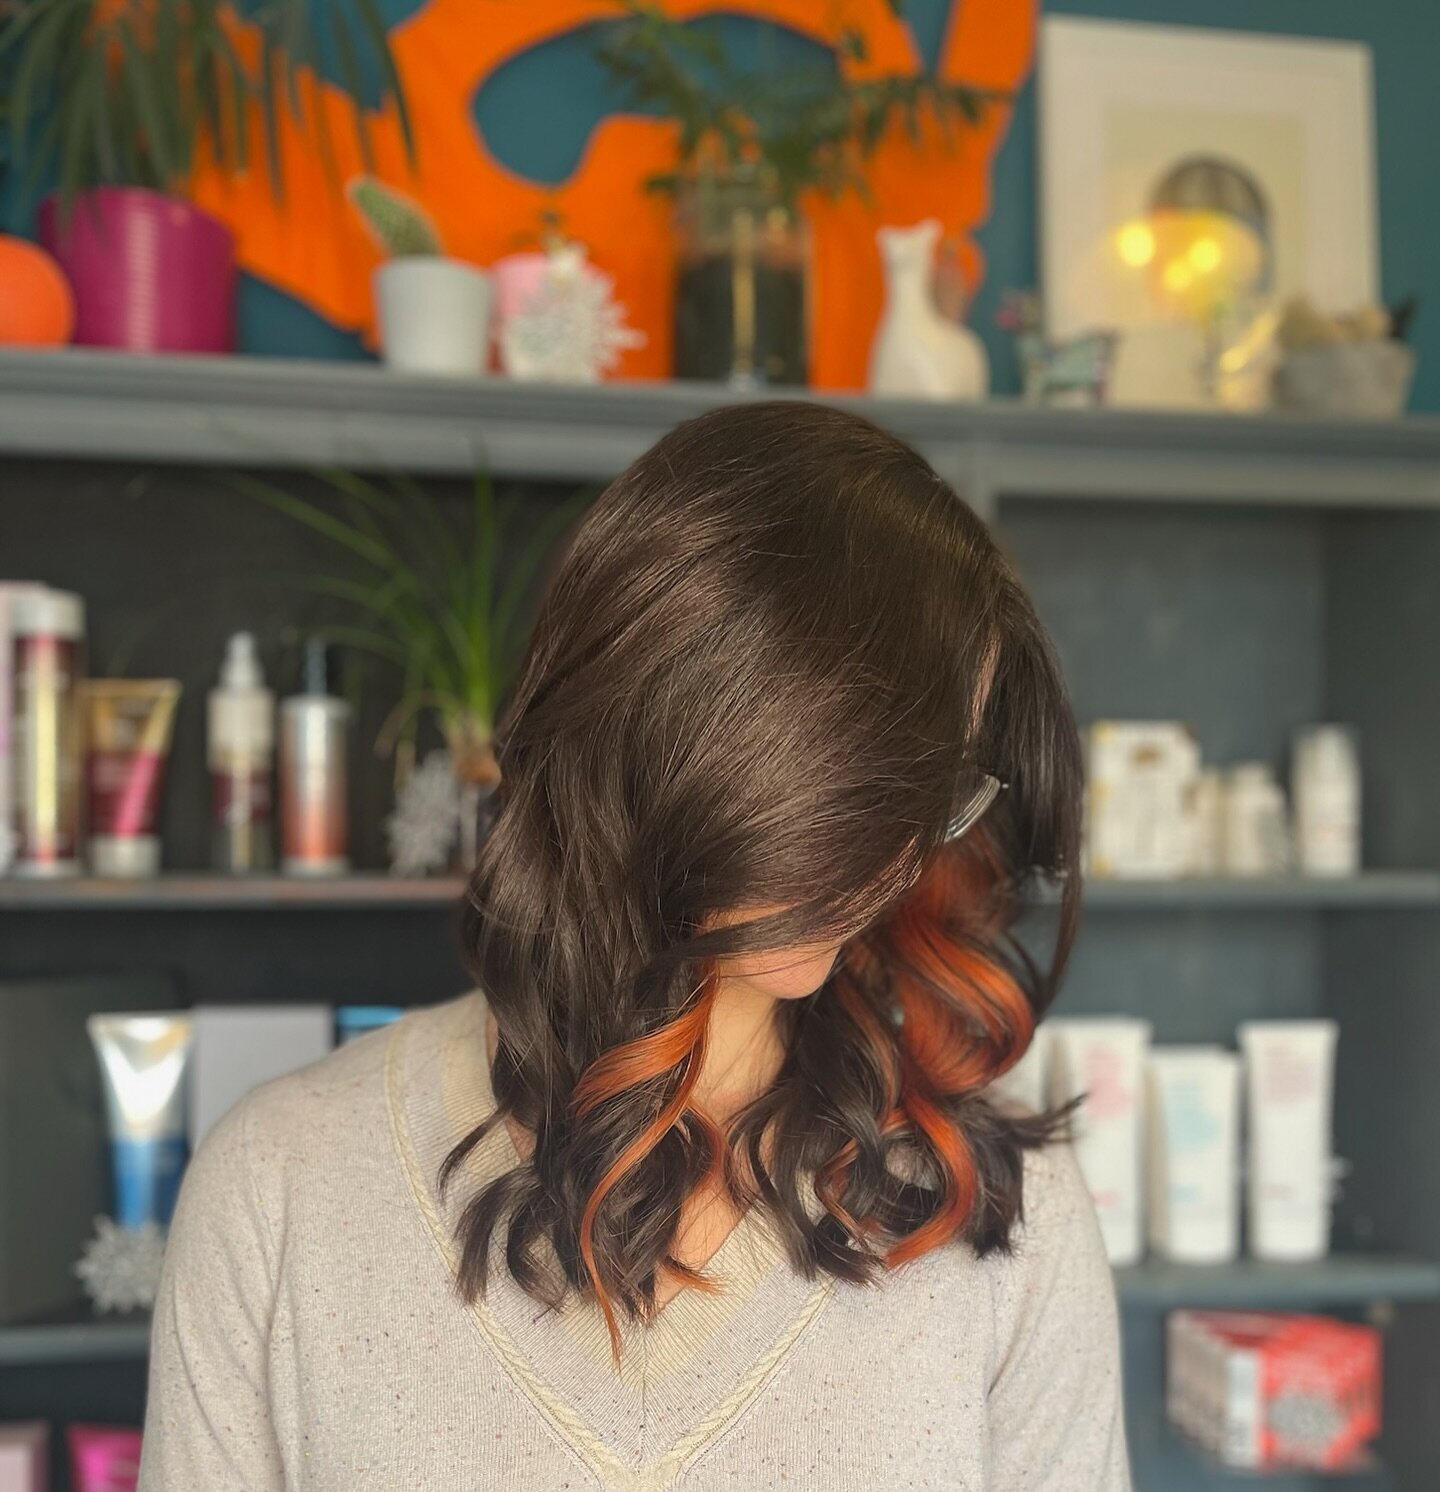 🤎🍊Orange Truffle Anyone?🍊🤎
We are absolutely eating up this burnt orange peel panel paired with this deliciously glossy brunette colour !
Dan knows their way around a peek-a-boo colour and worked with our own sweet treat apprentice Tilly to creat